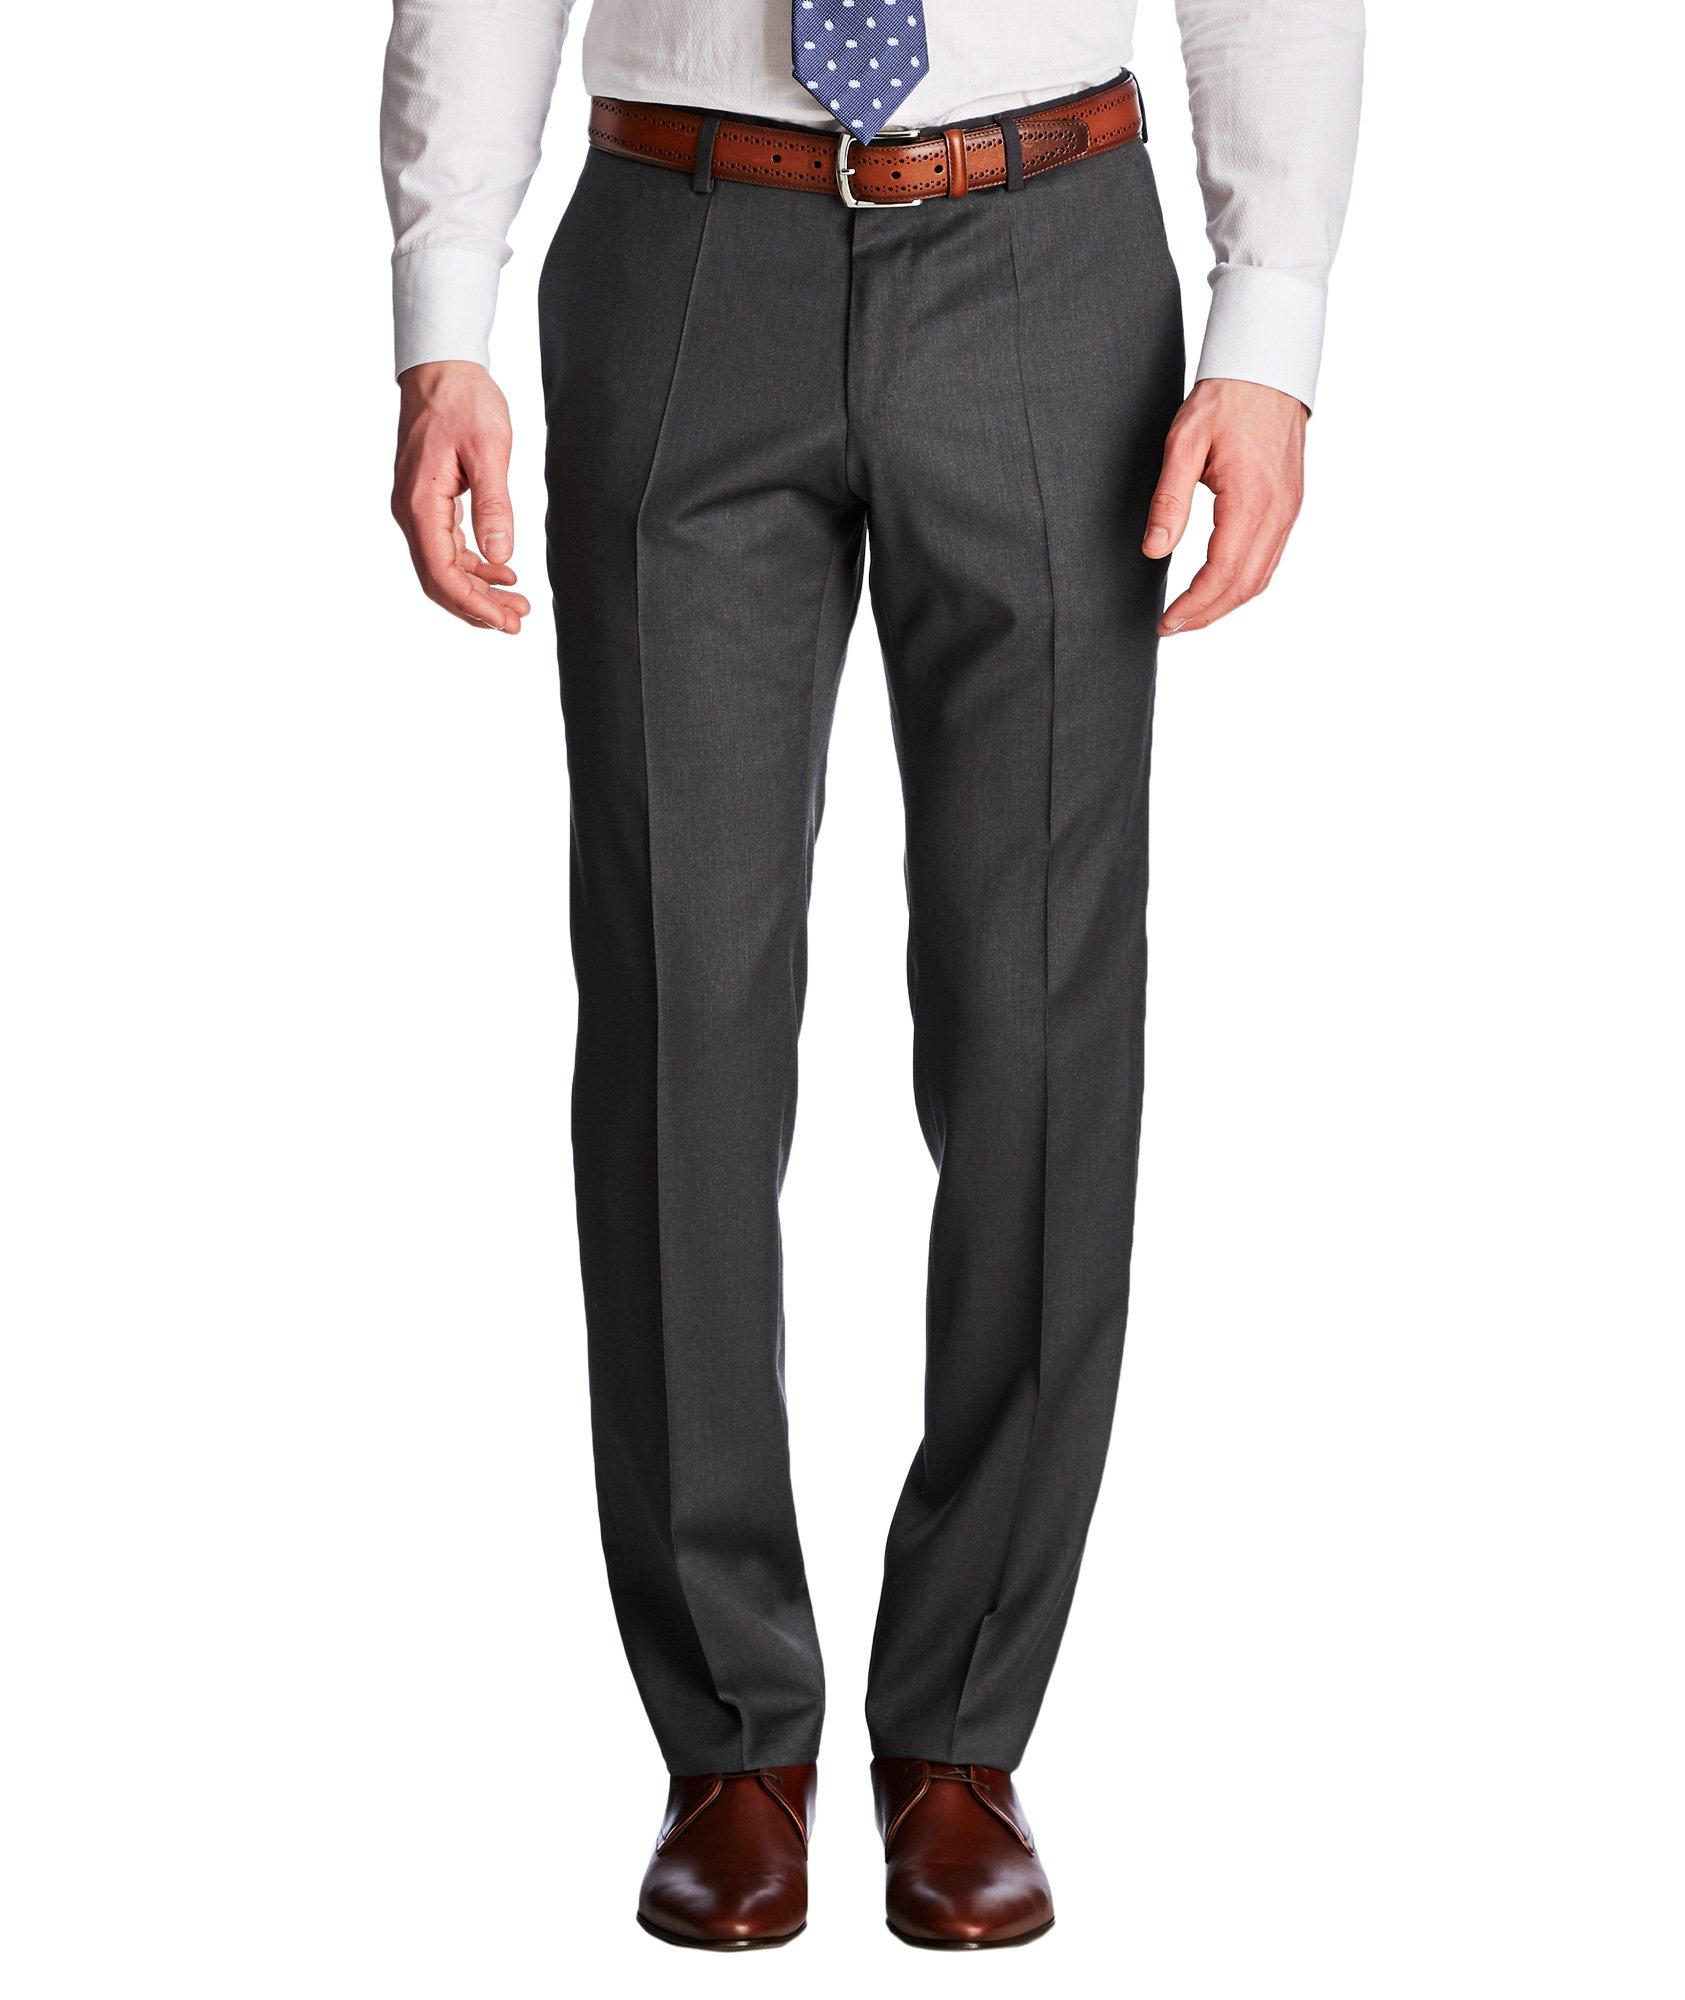 Gibson "Create Your Look" Dress Pants  image 0